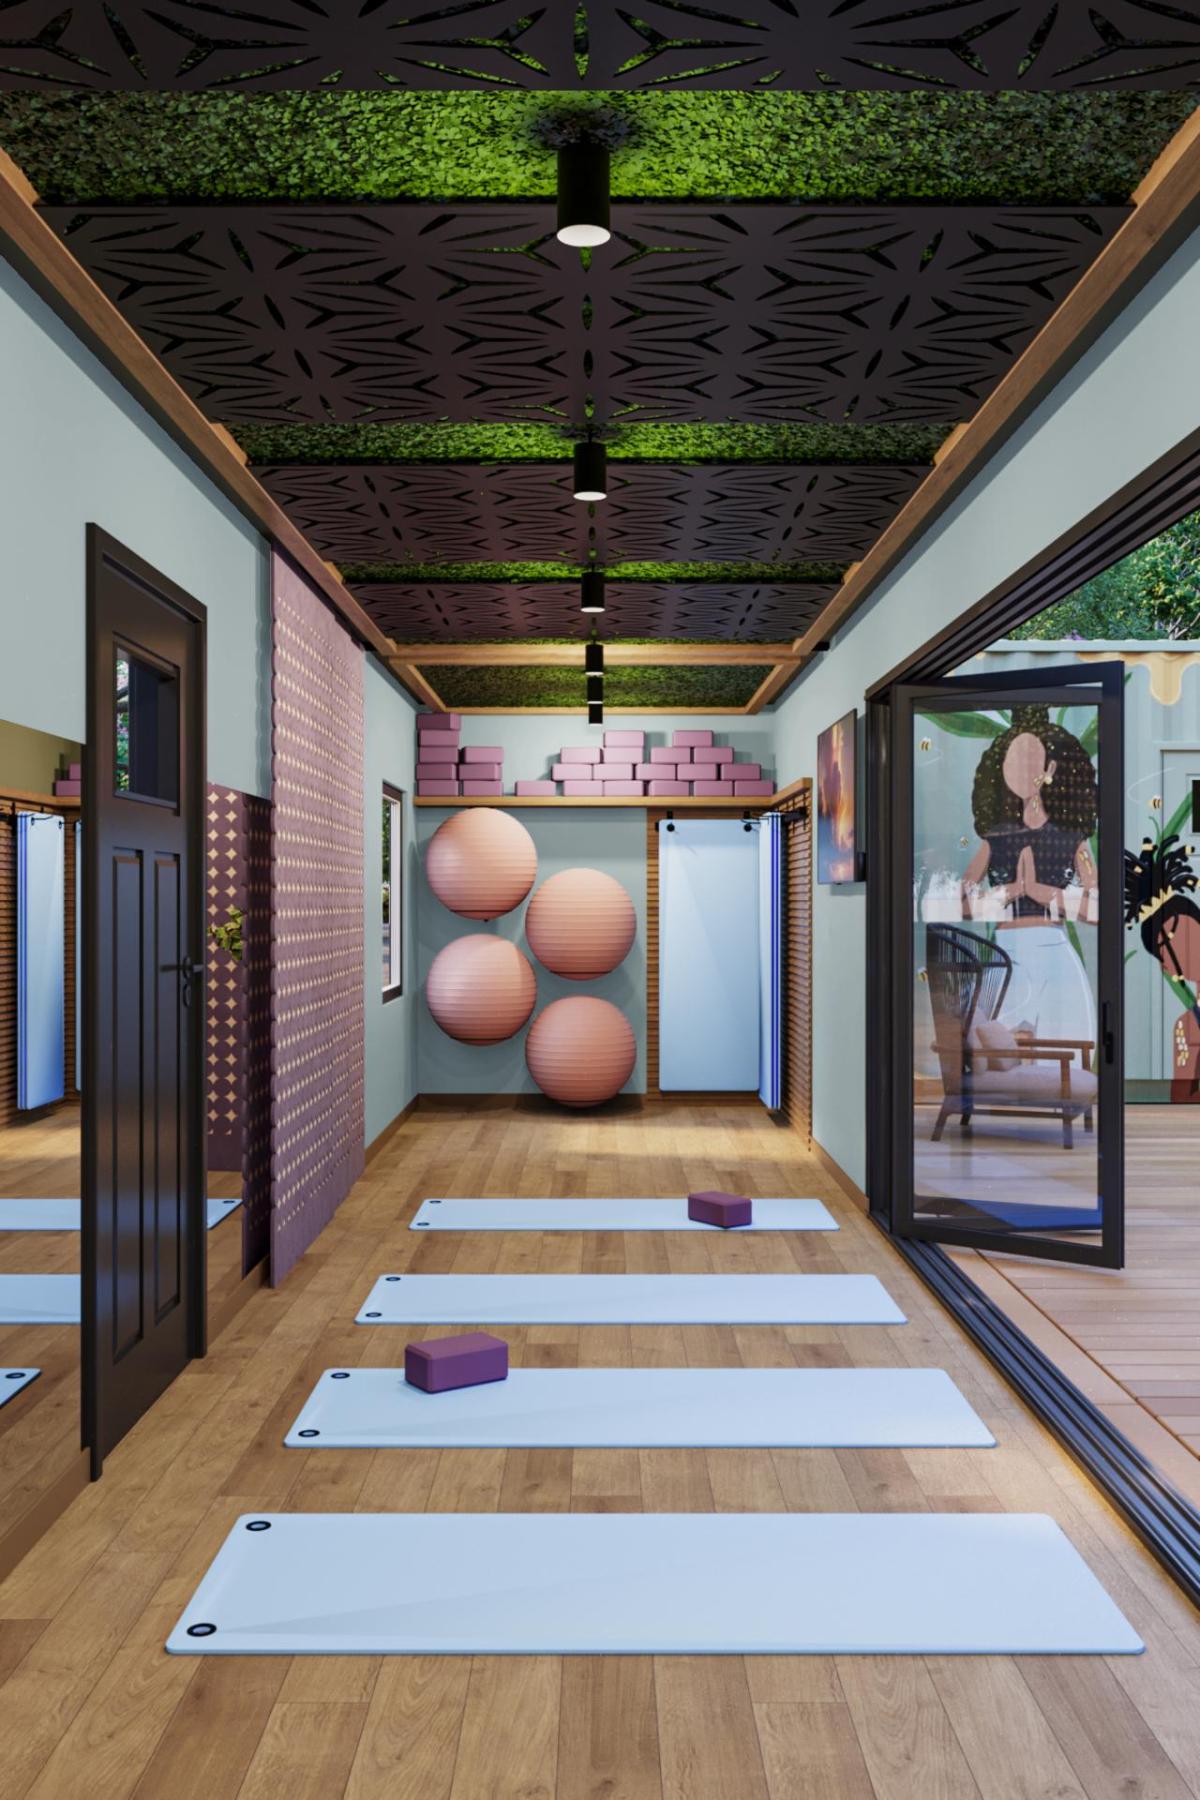 Room with yoga mats on the floor